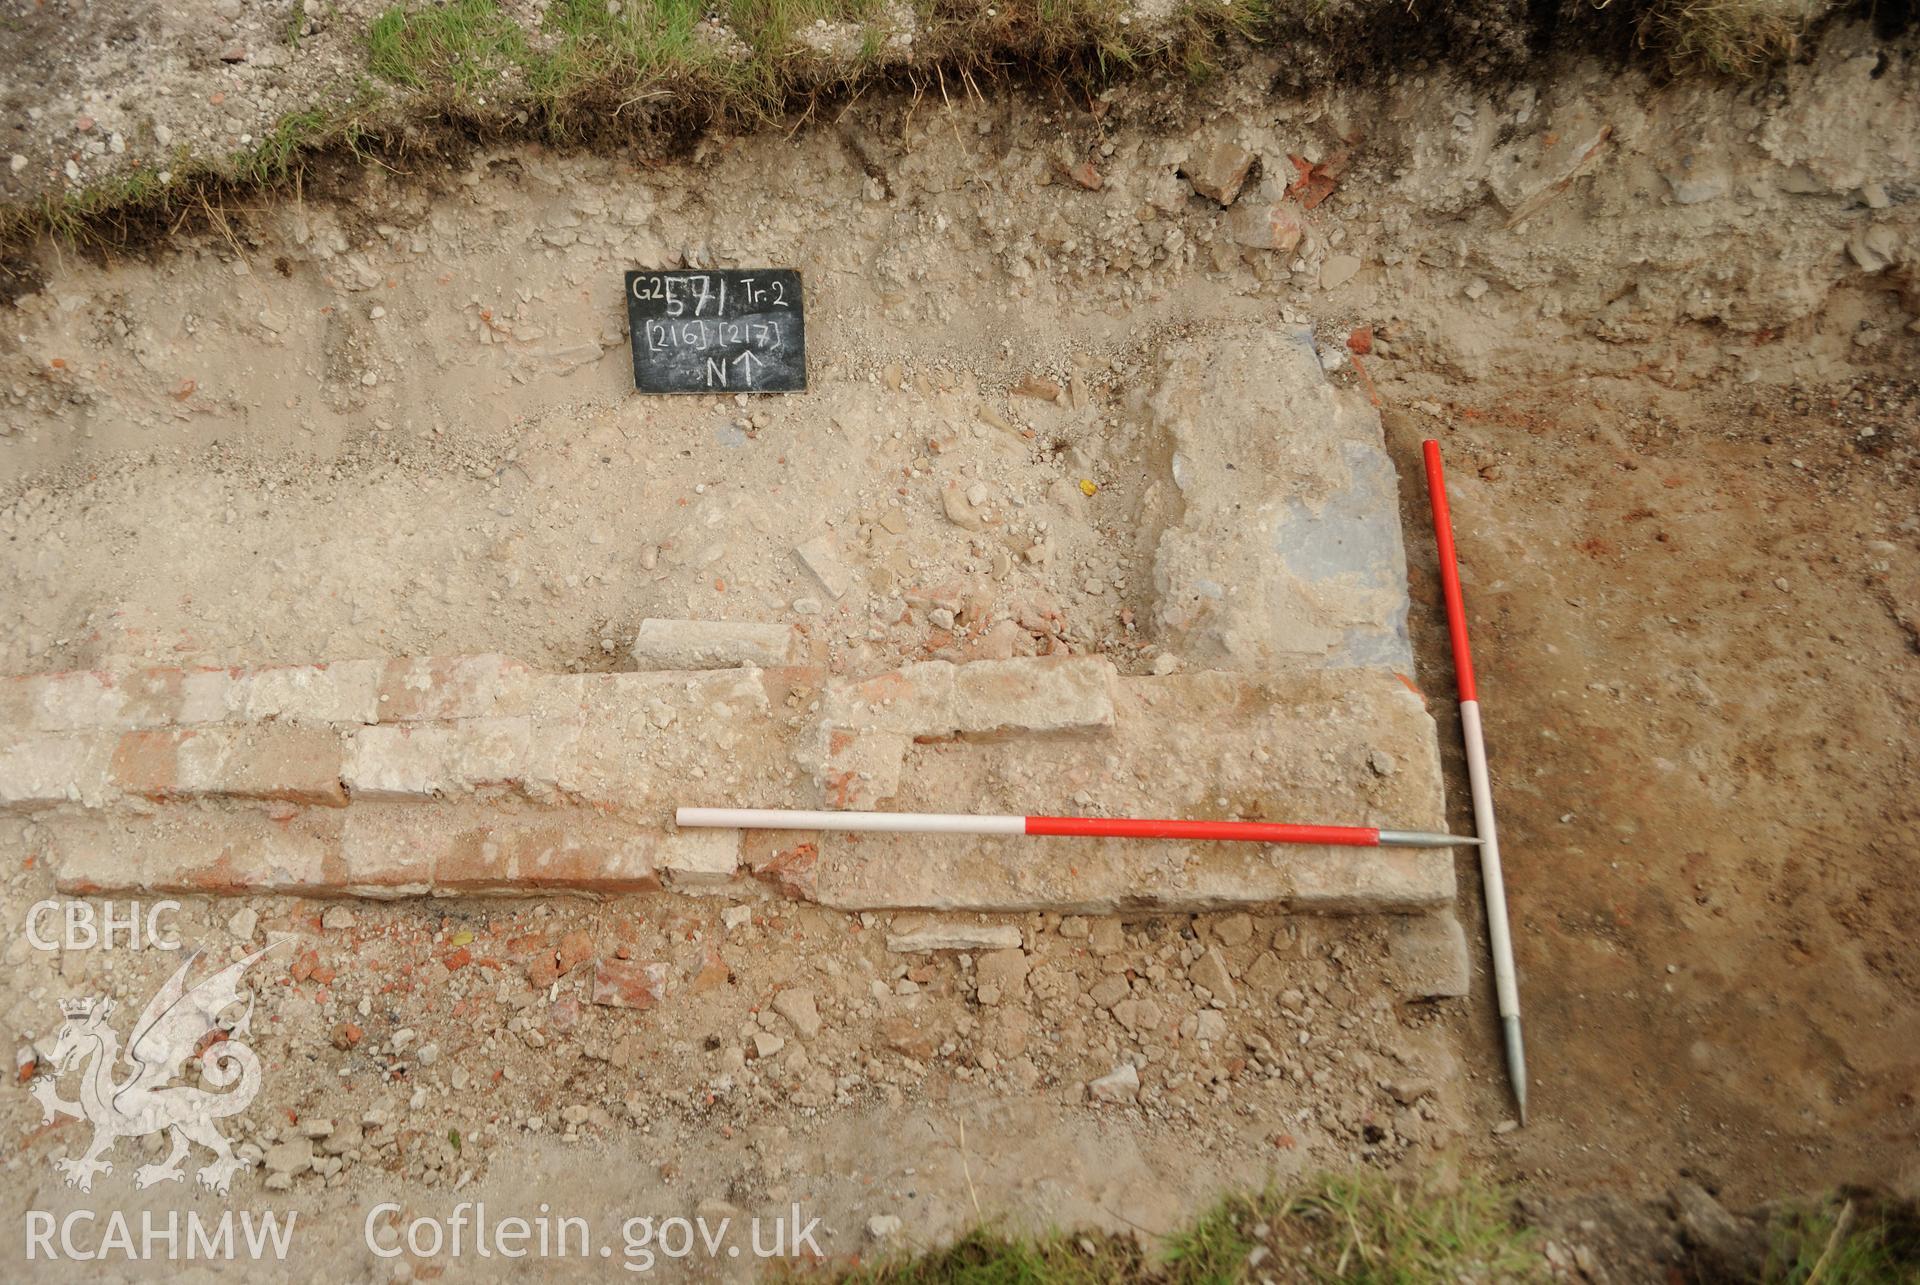 View from south (post excavation) of east facing elevation of brick walled feature & slate threshold above. Photographed during archaeological evaluation of Kinmel Park, Abergele, conducted by Gwynedd Archaeological Trust, 24/08/2018. Project no. 2571.